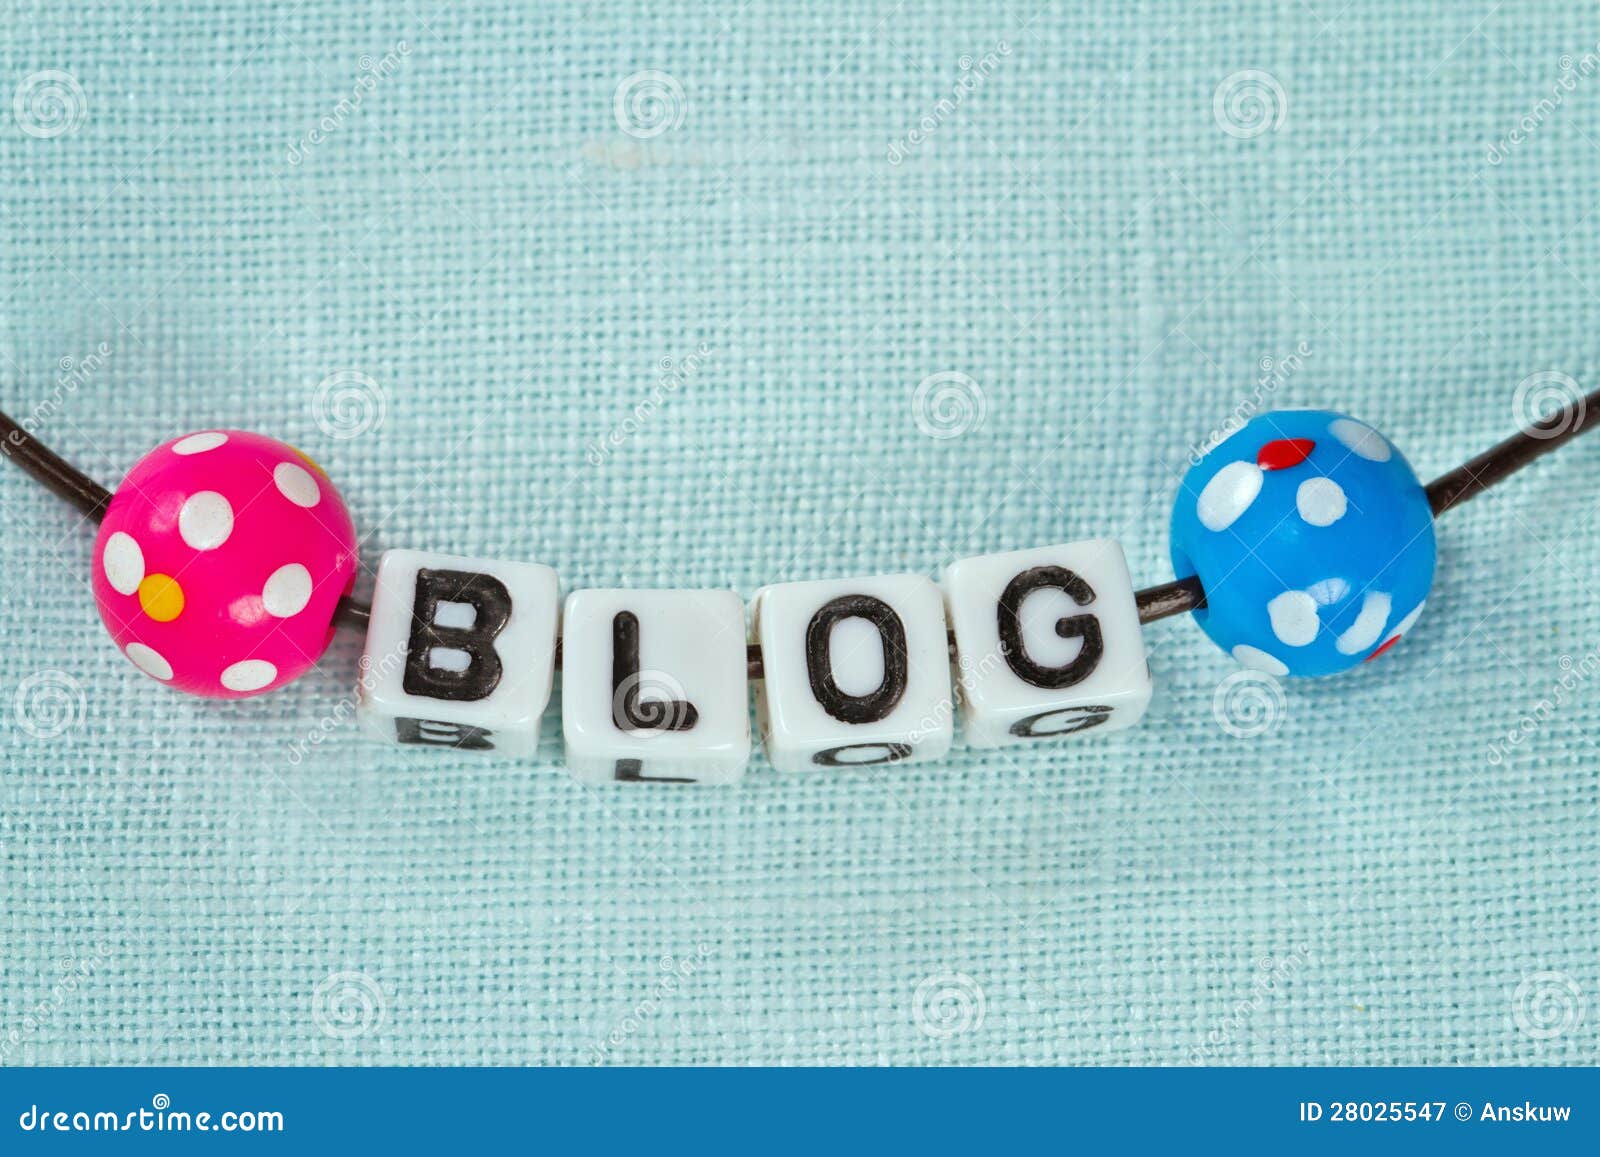 blogging concept - letters on blue fabric